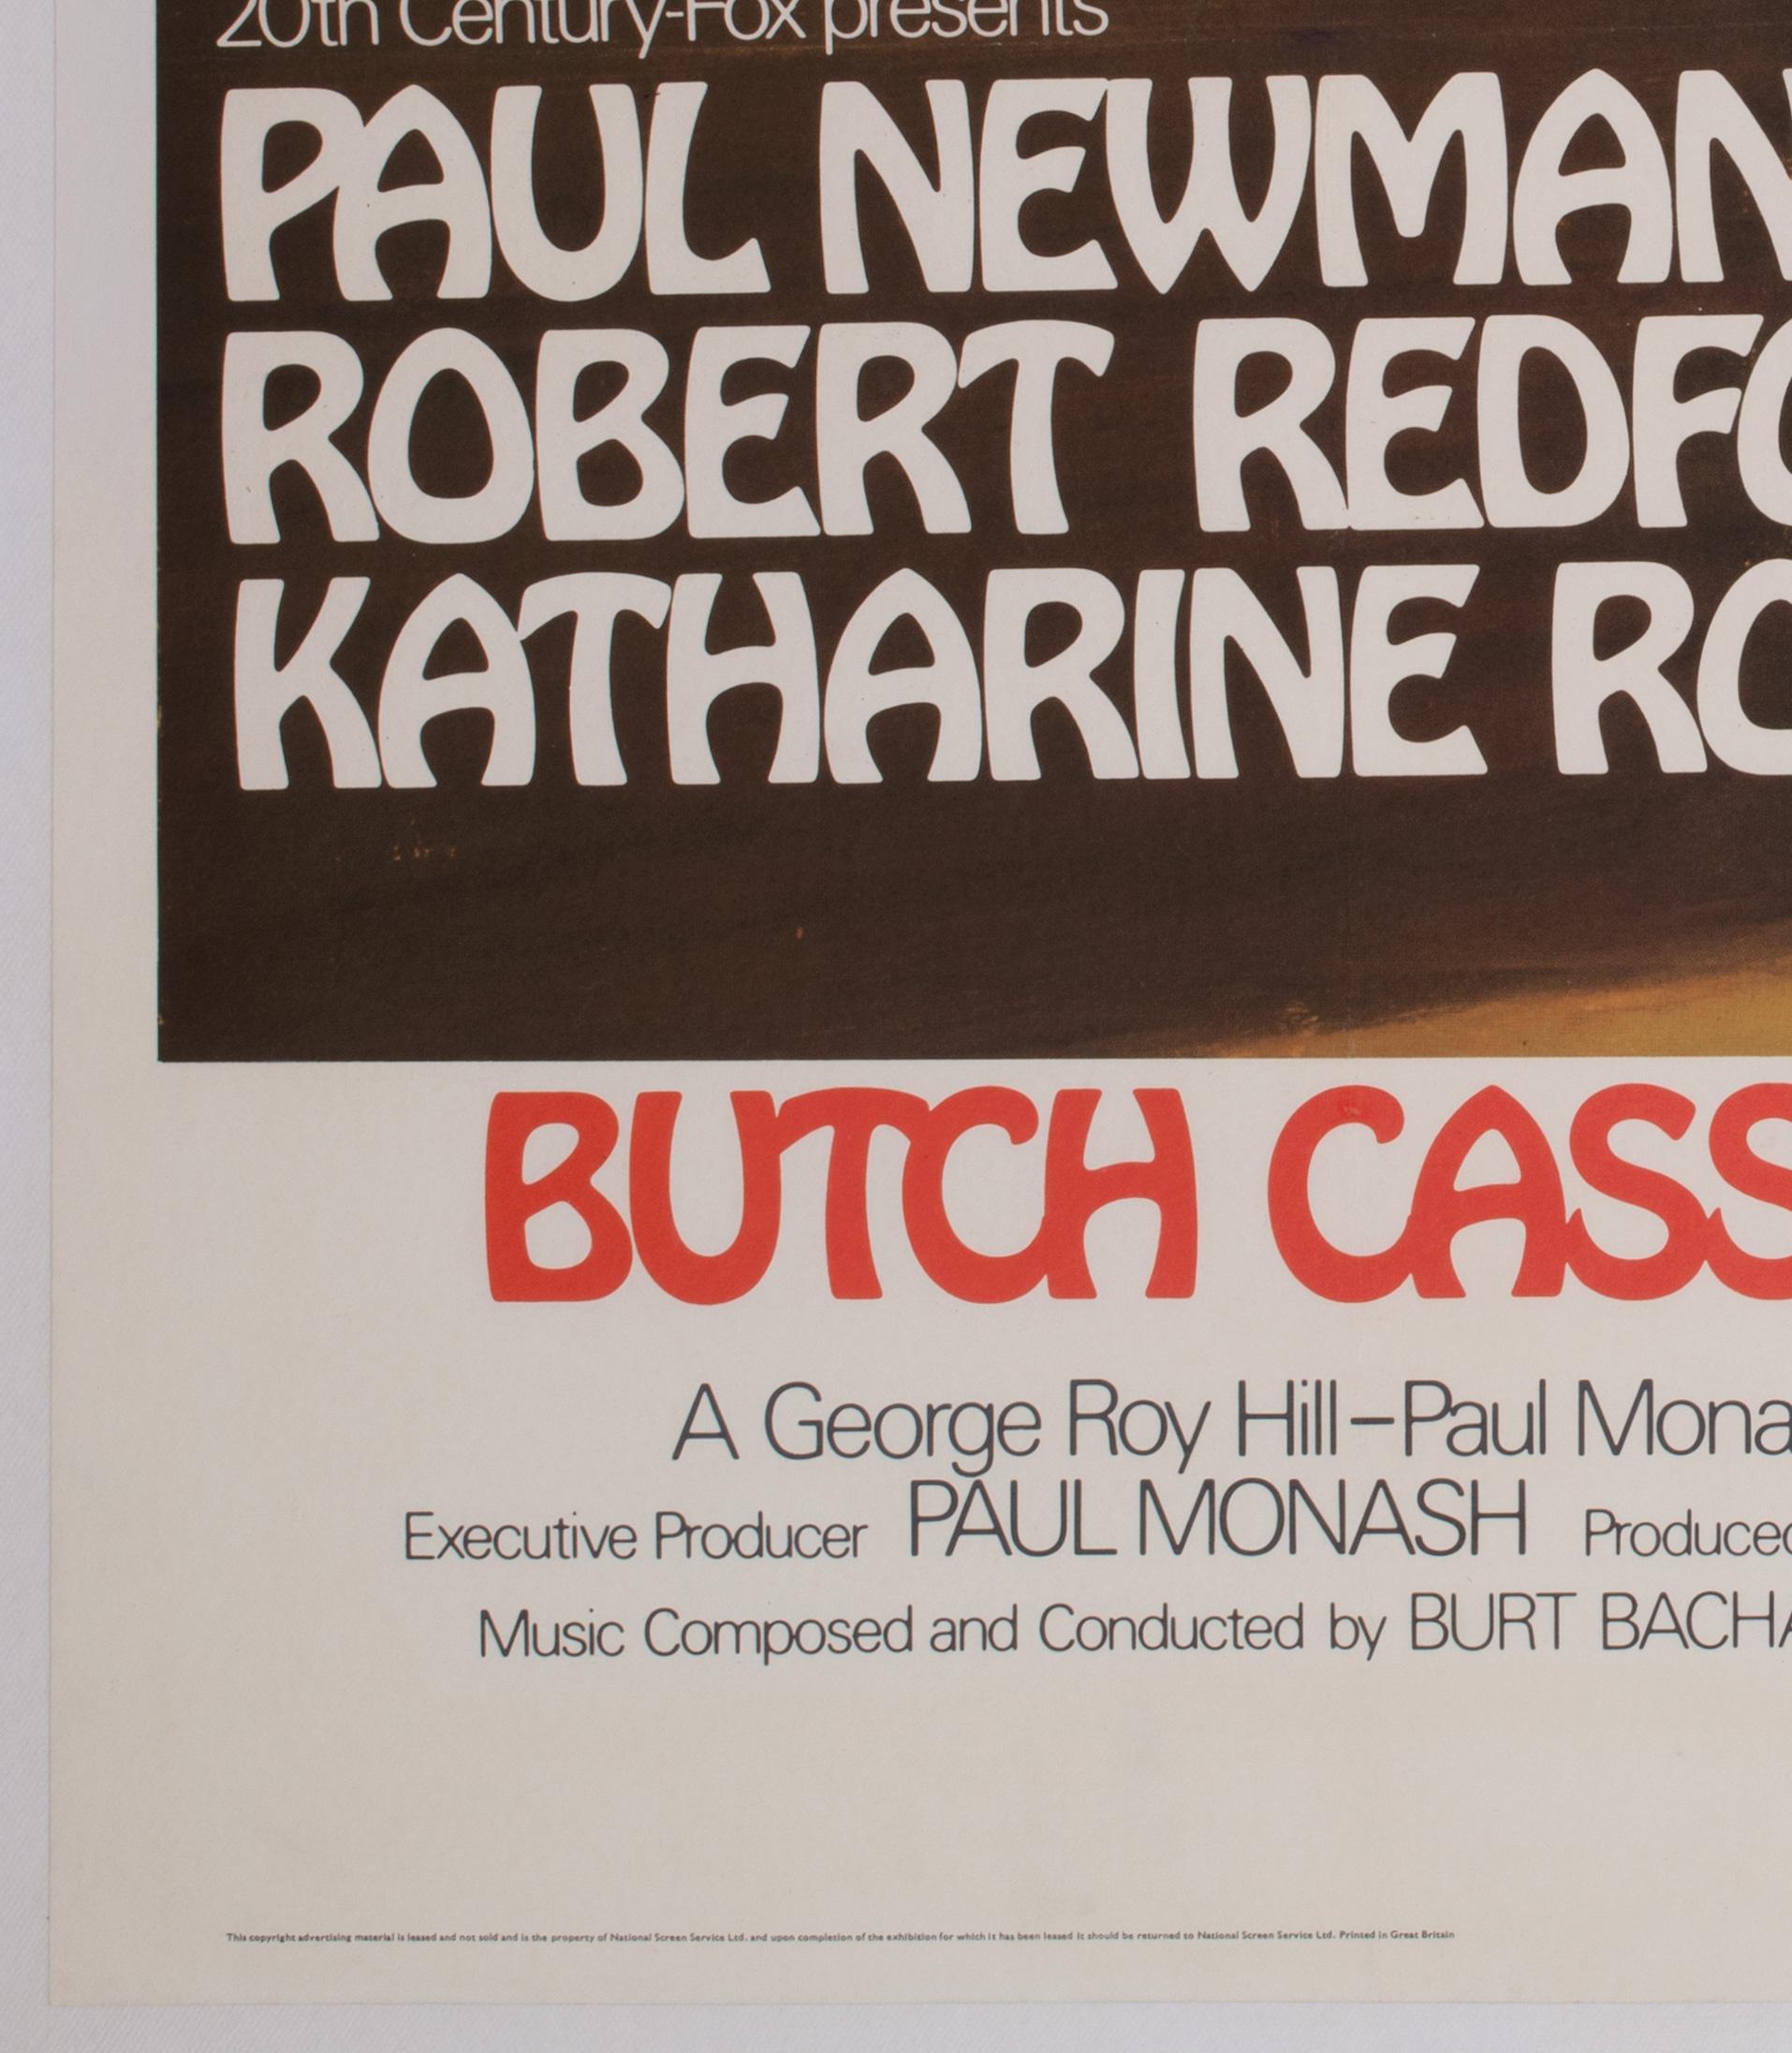 Paper Butch Cassidy and the Sundance Kid UK Film Movie Poster, Tom Beauvais, 1969 For Sale